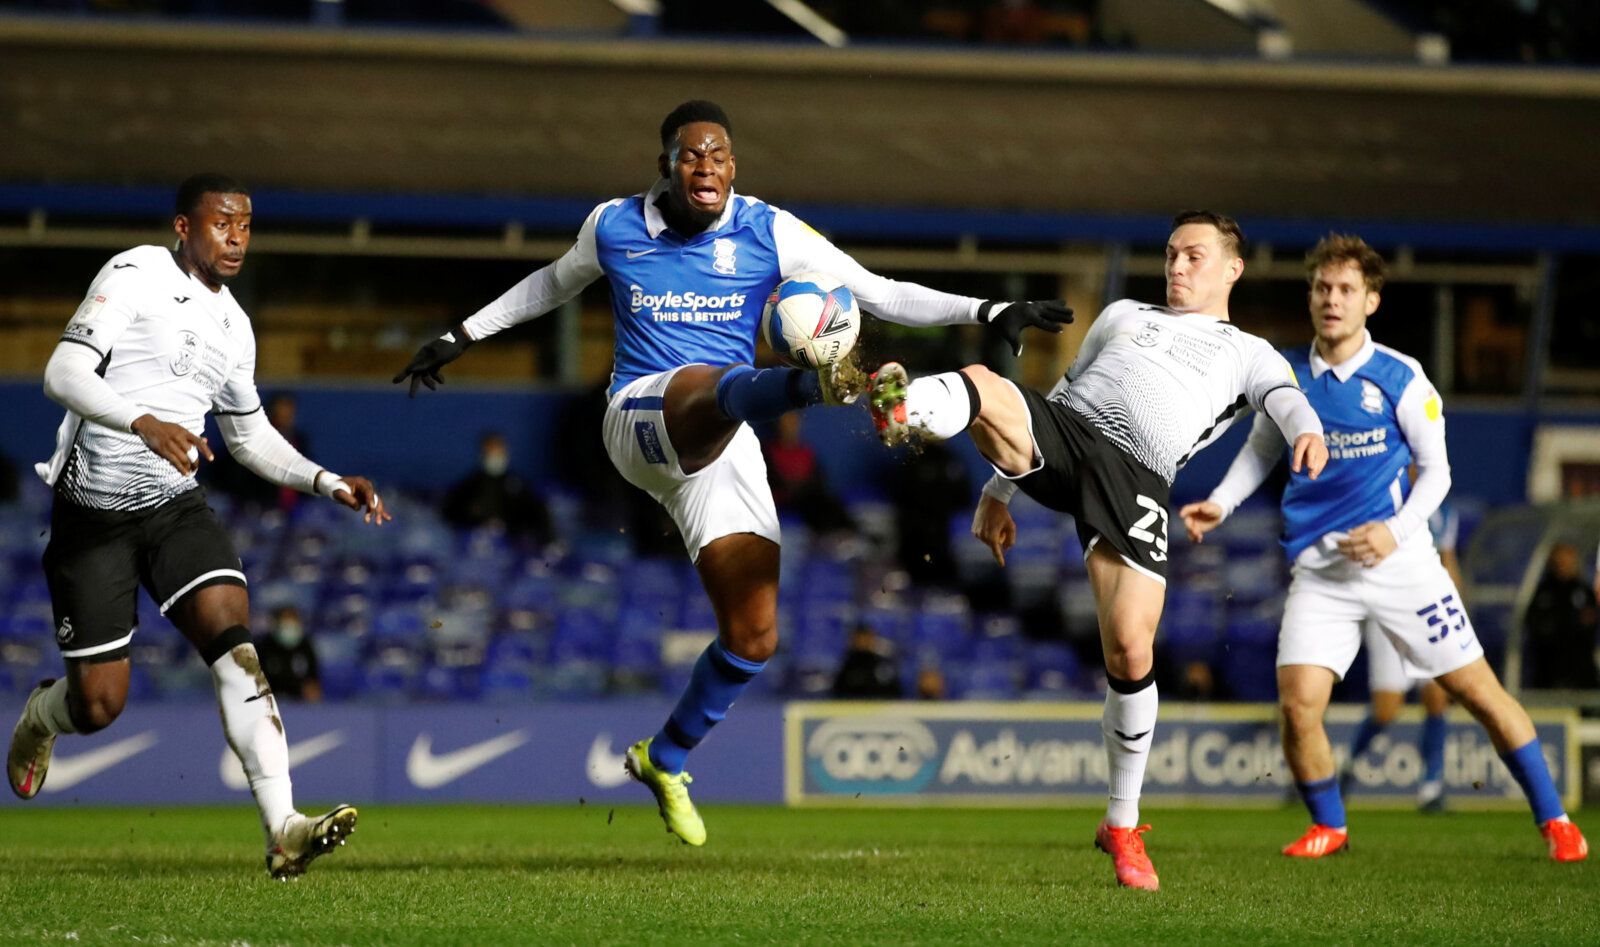 Soccer Football - Championship - Birmingham City v Swansea City - St Andrew's, Birmingham, Britain - April 2, 2021  Swansea City's Connor Roberts concedes a penalty against Birmingham City's Jonathan Leko  Action Images/Andrew Boyers  EDITORIAL USE ONLY. No use with unauthorized audio, video, data, fixture lists, club/league logos or 